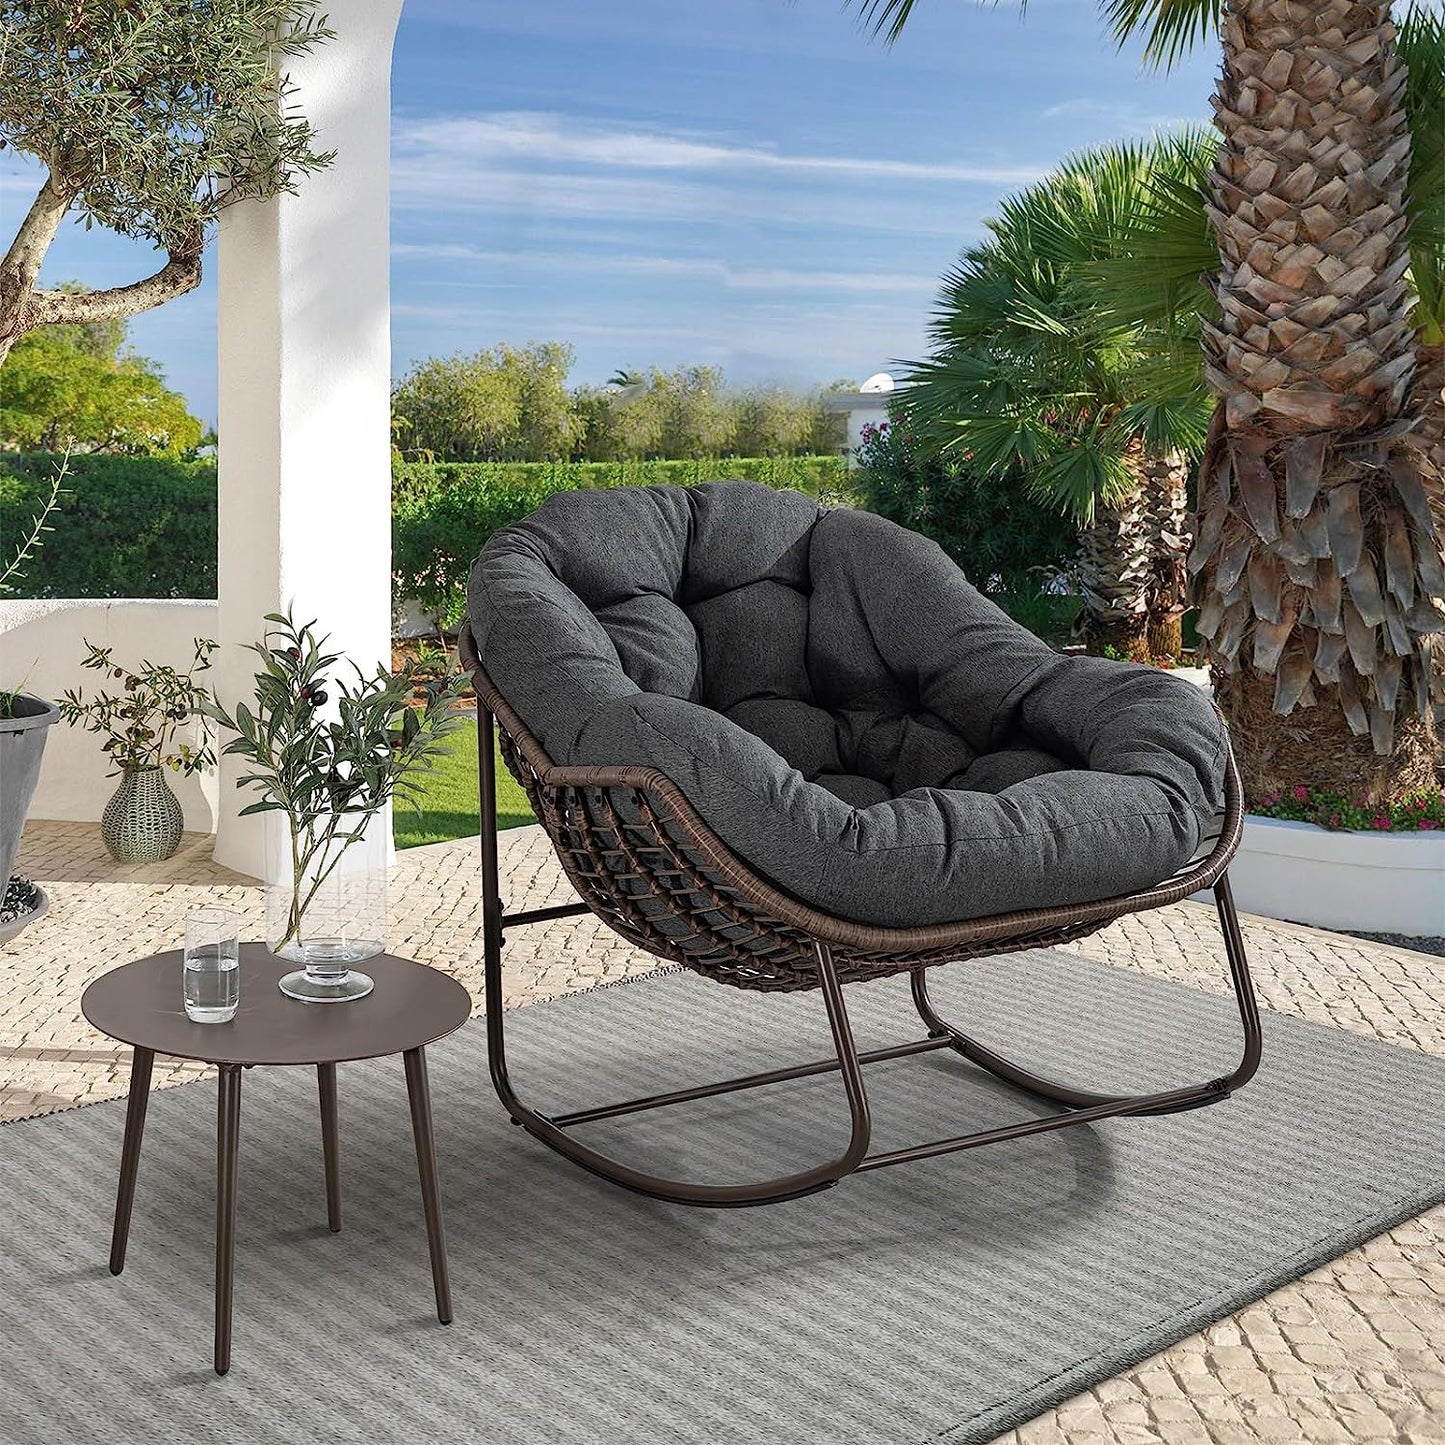 Syngar Outdoor Rocking Chair, Patio Oversized Wicker Egg-Shaped Rocker Chair with Gray Padded Cushion, Indoor & Outdoor Comfy Lounge Recliner Chair for Balcony, Poolside, Garden, Backyard, Deck